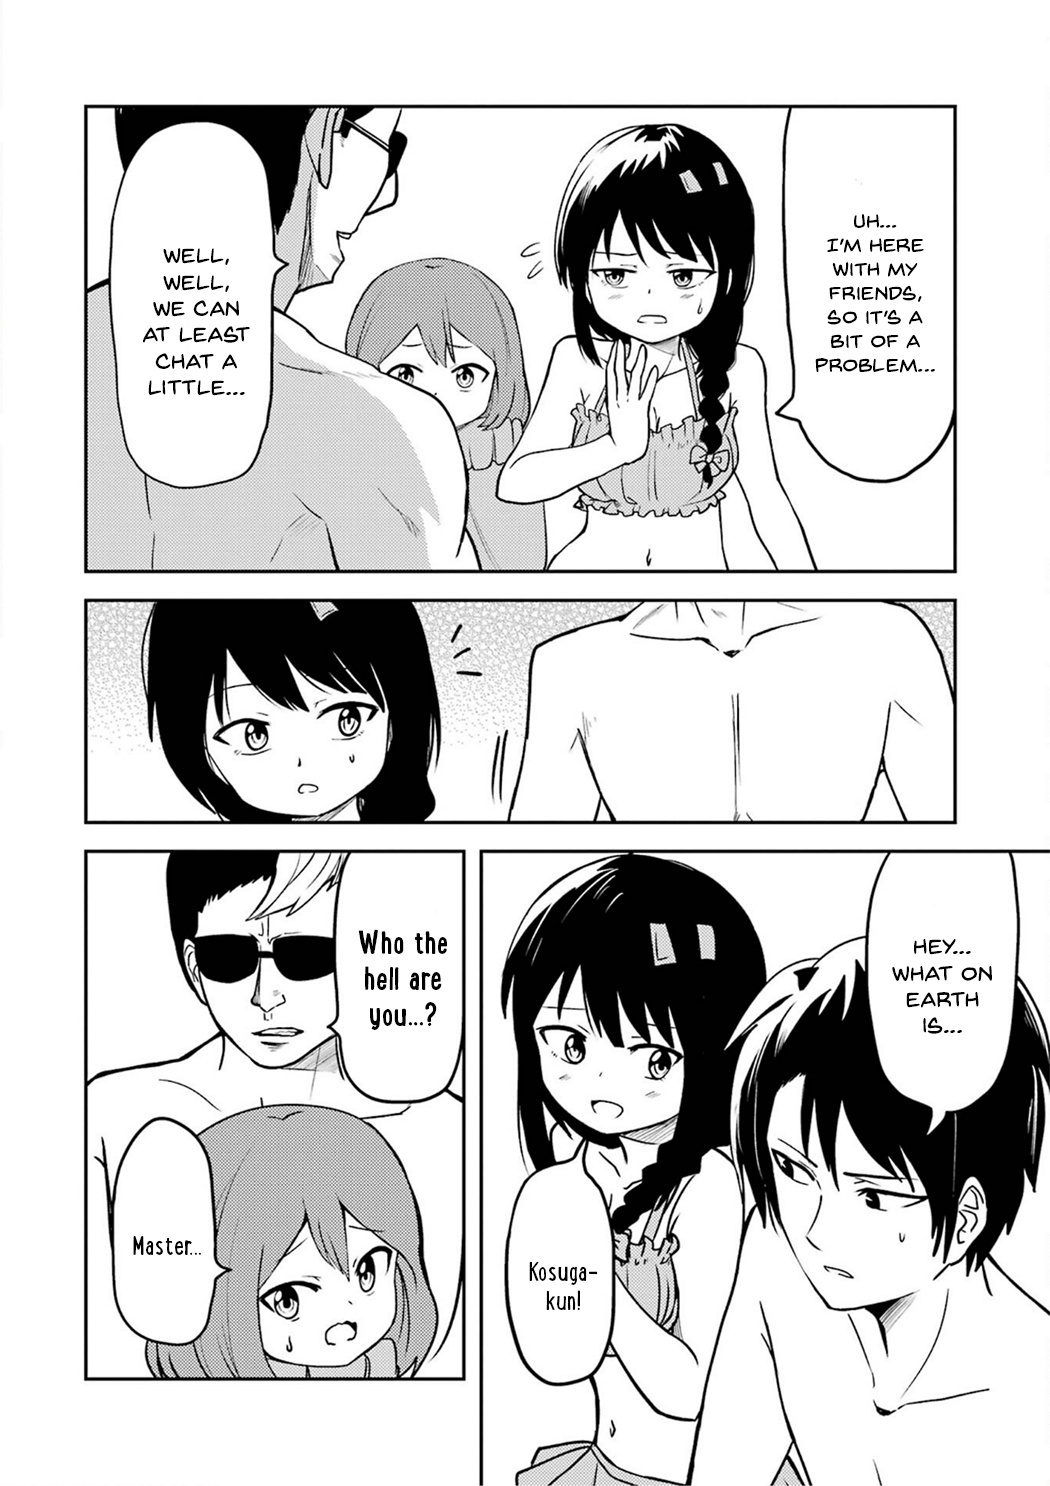 Turns Out My Dick Was A Cute Girl Vol.2 Chapter 24: My Dick And The Sea 2 - Picture 2